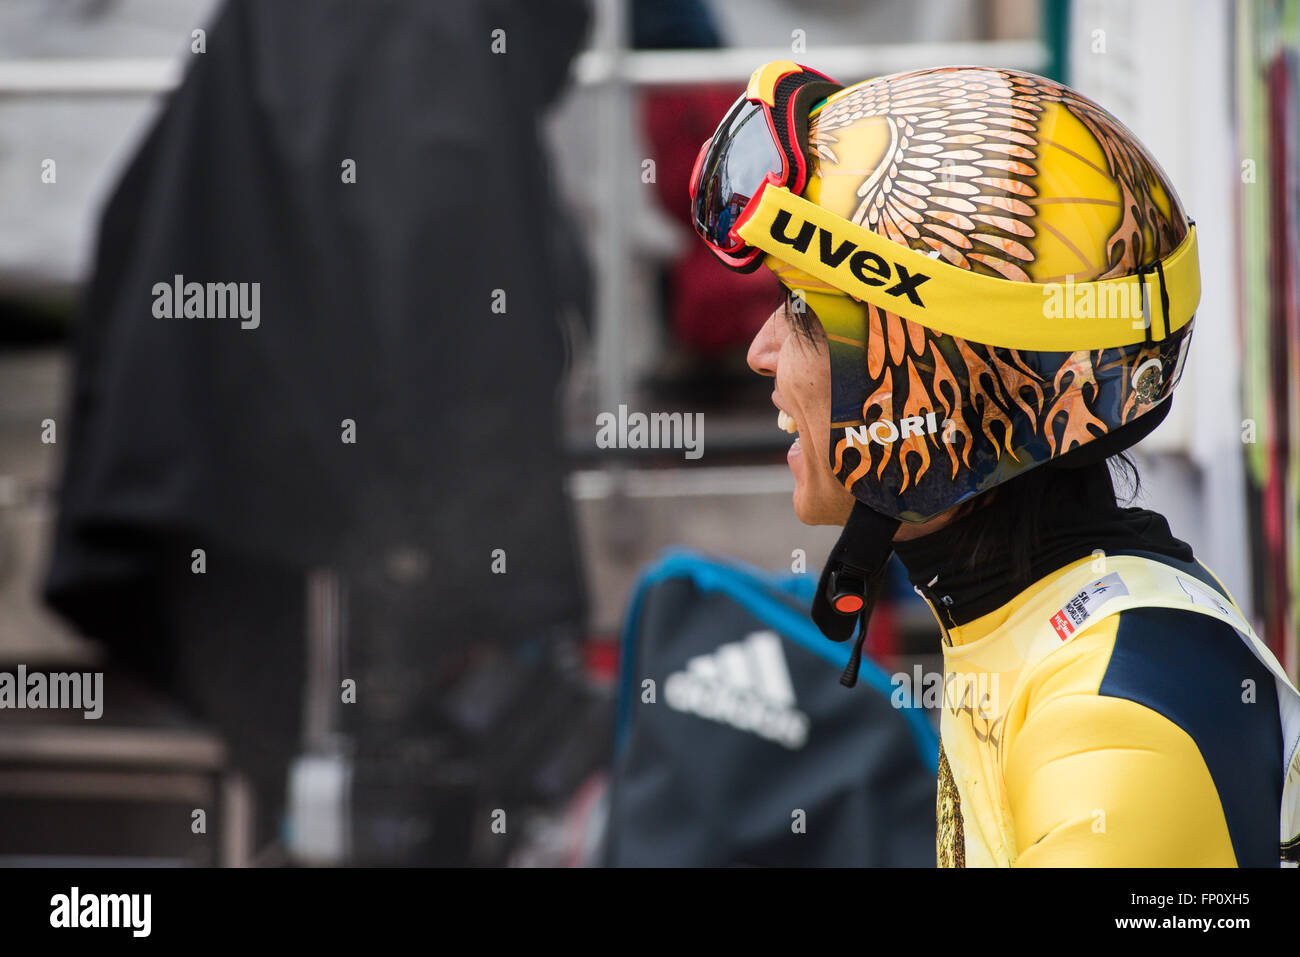 Planica, Slovenia. 17th Mar, 2016. Noriaki Kasai of Japan competes for 500 time on a World Cup competition during Planica FIS Ski Jumping World Cup final on the March 17, 2016 in Planica, Slovenia. © Rok Rakun/Pacific Press/Alamy Live News Stock Photo